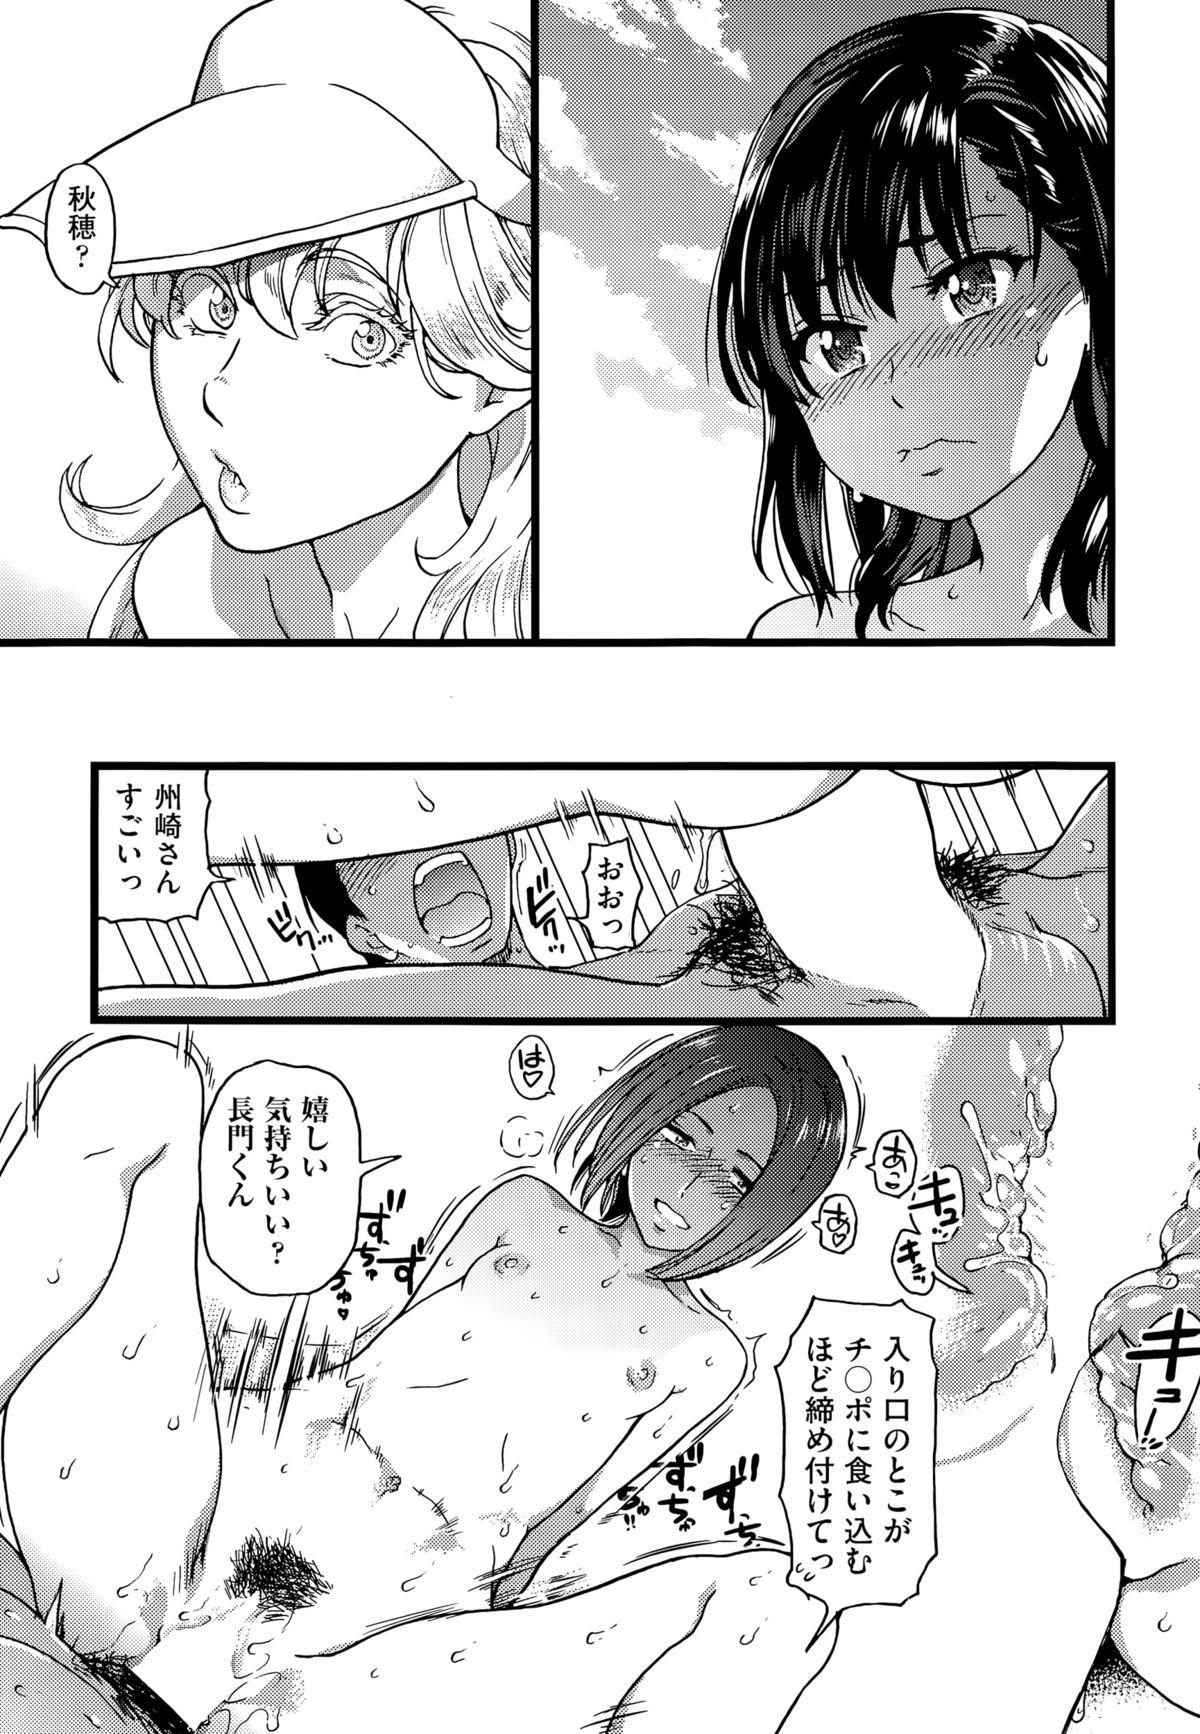 Squirting COMIC AUN 2015-05 Facebook - Page 10